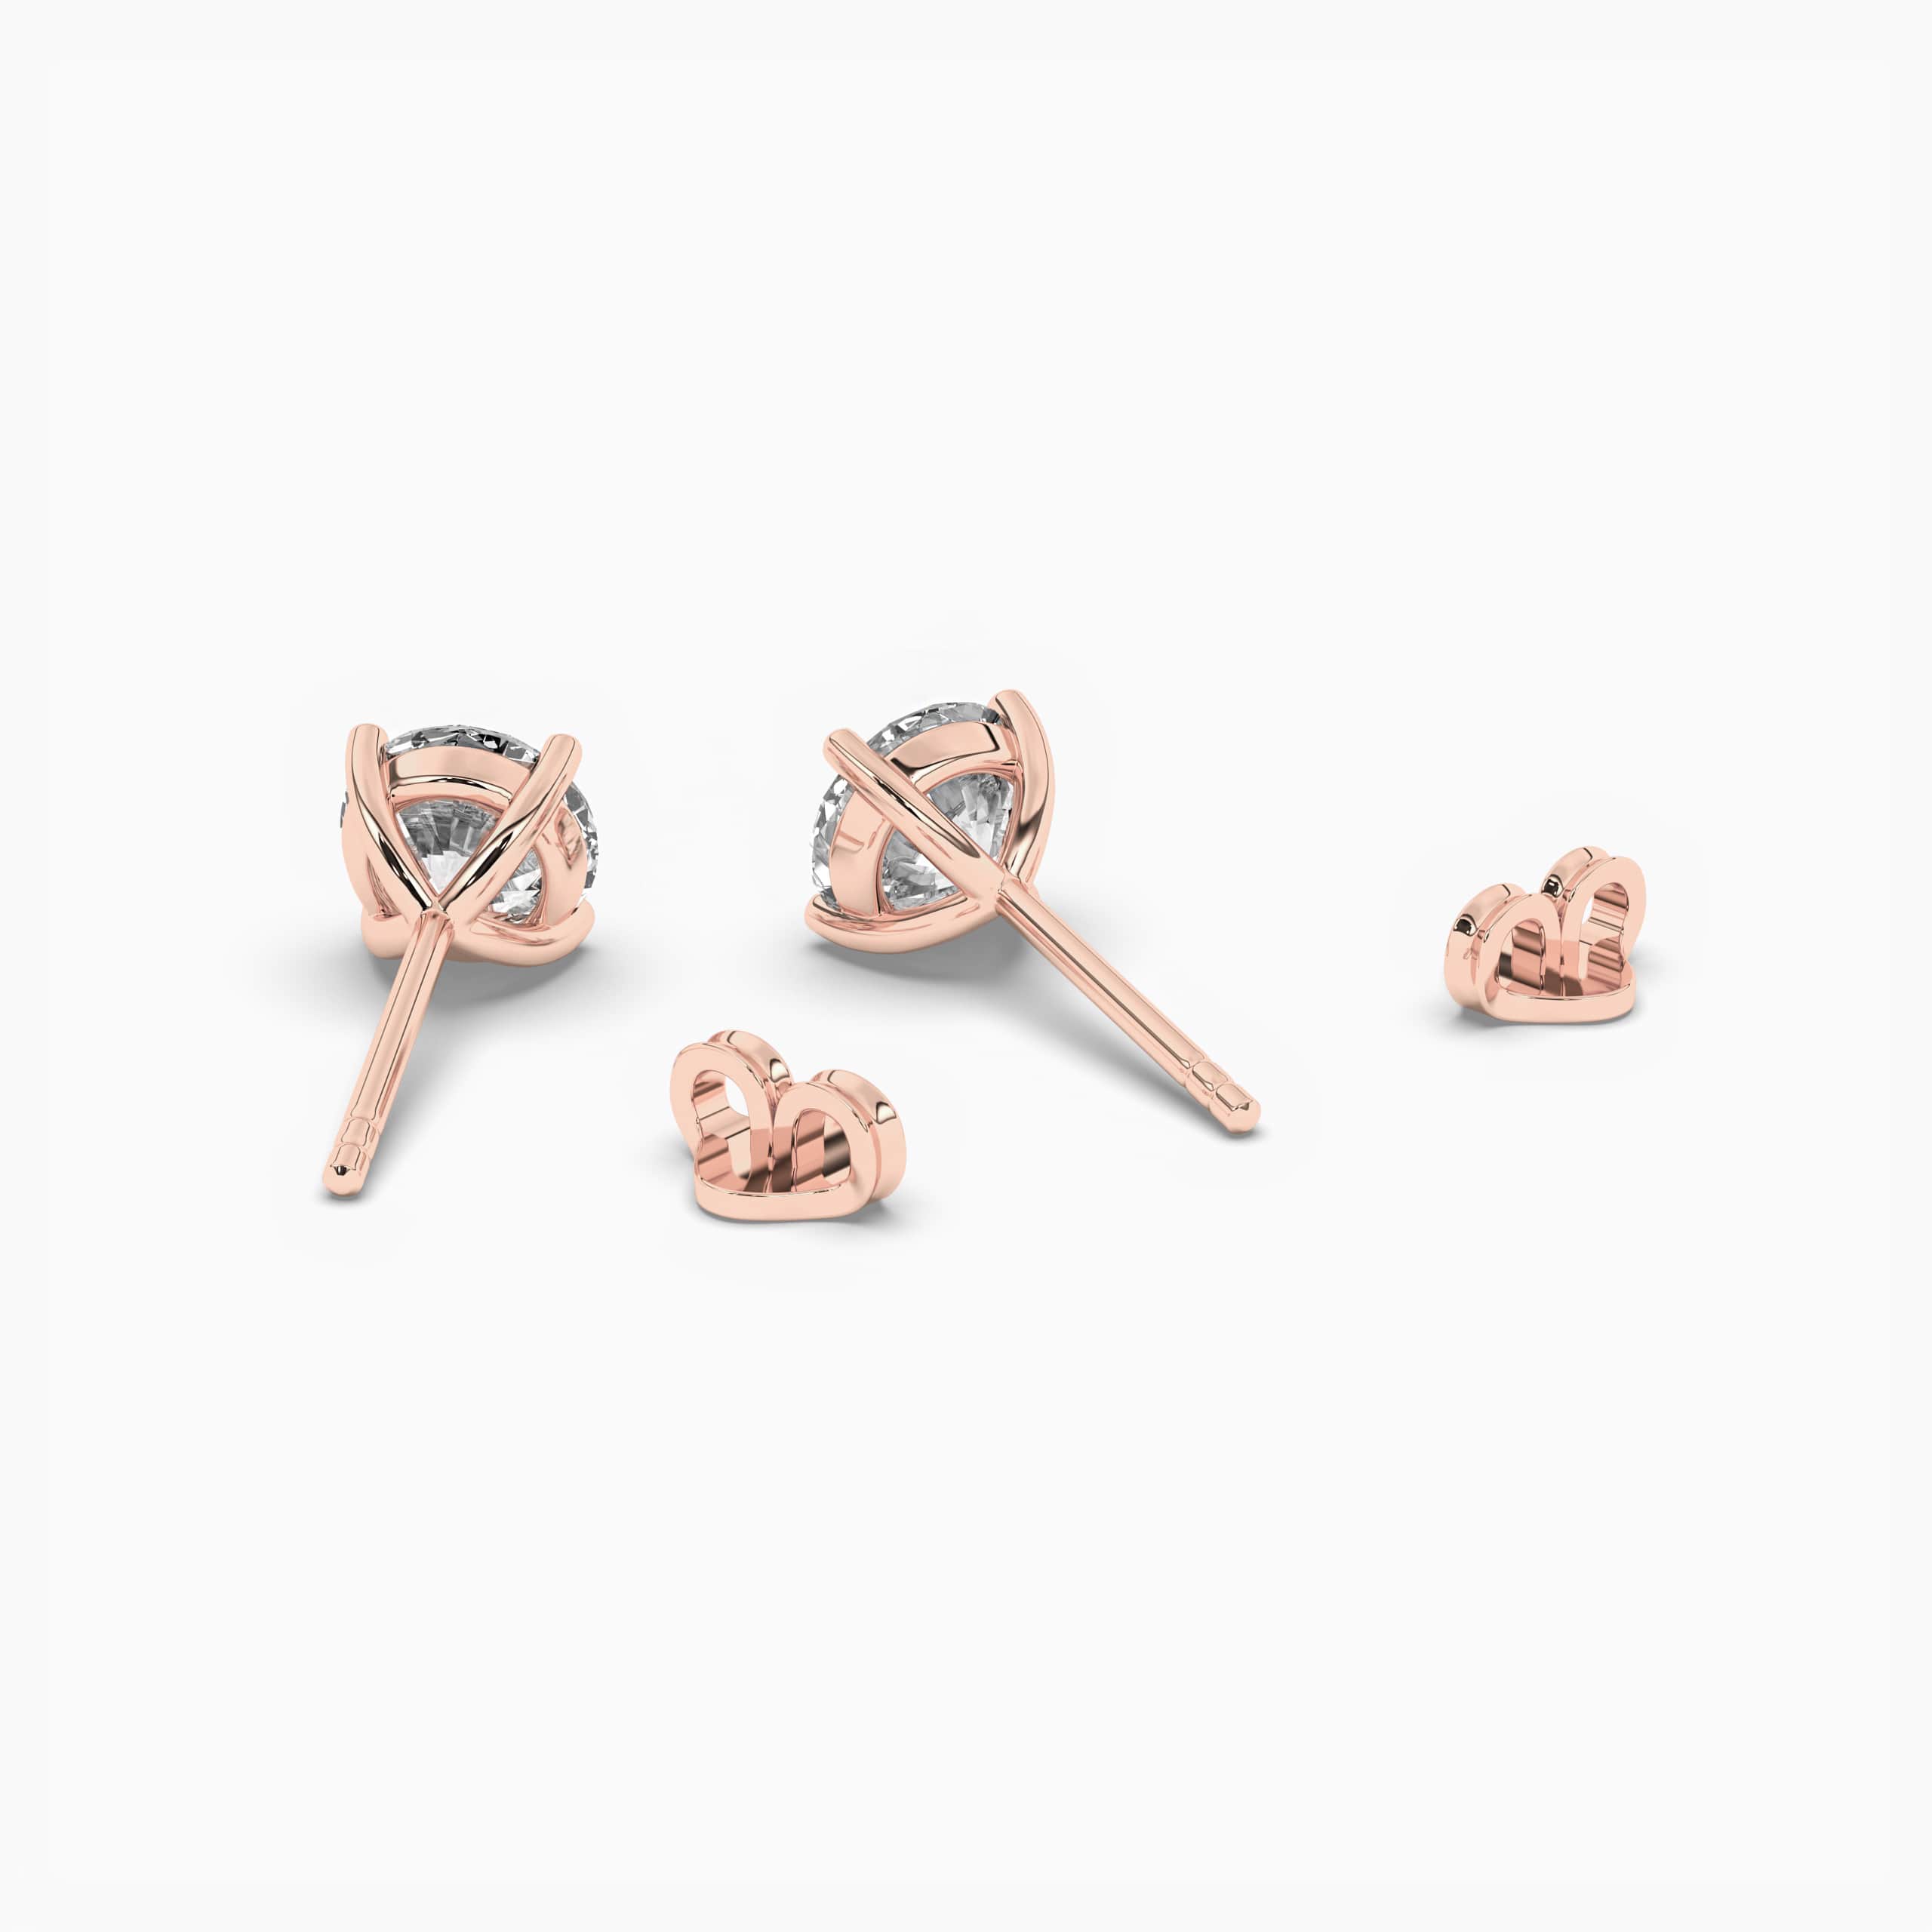 Round Cut Natural Quality Diamond Stud Earrings